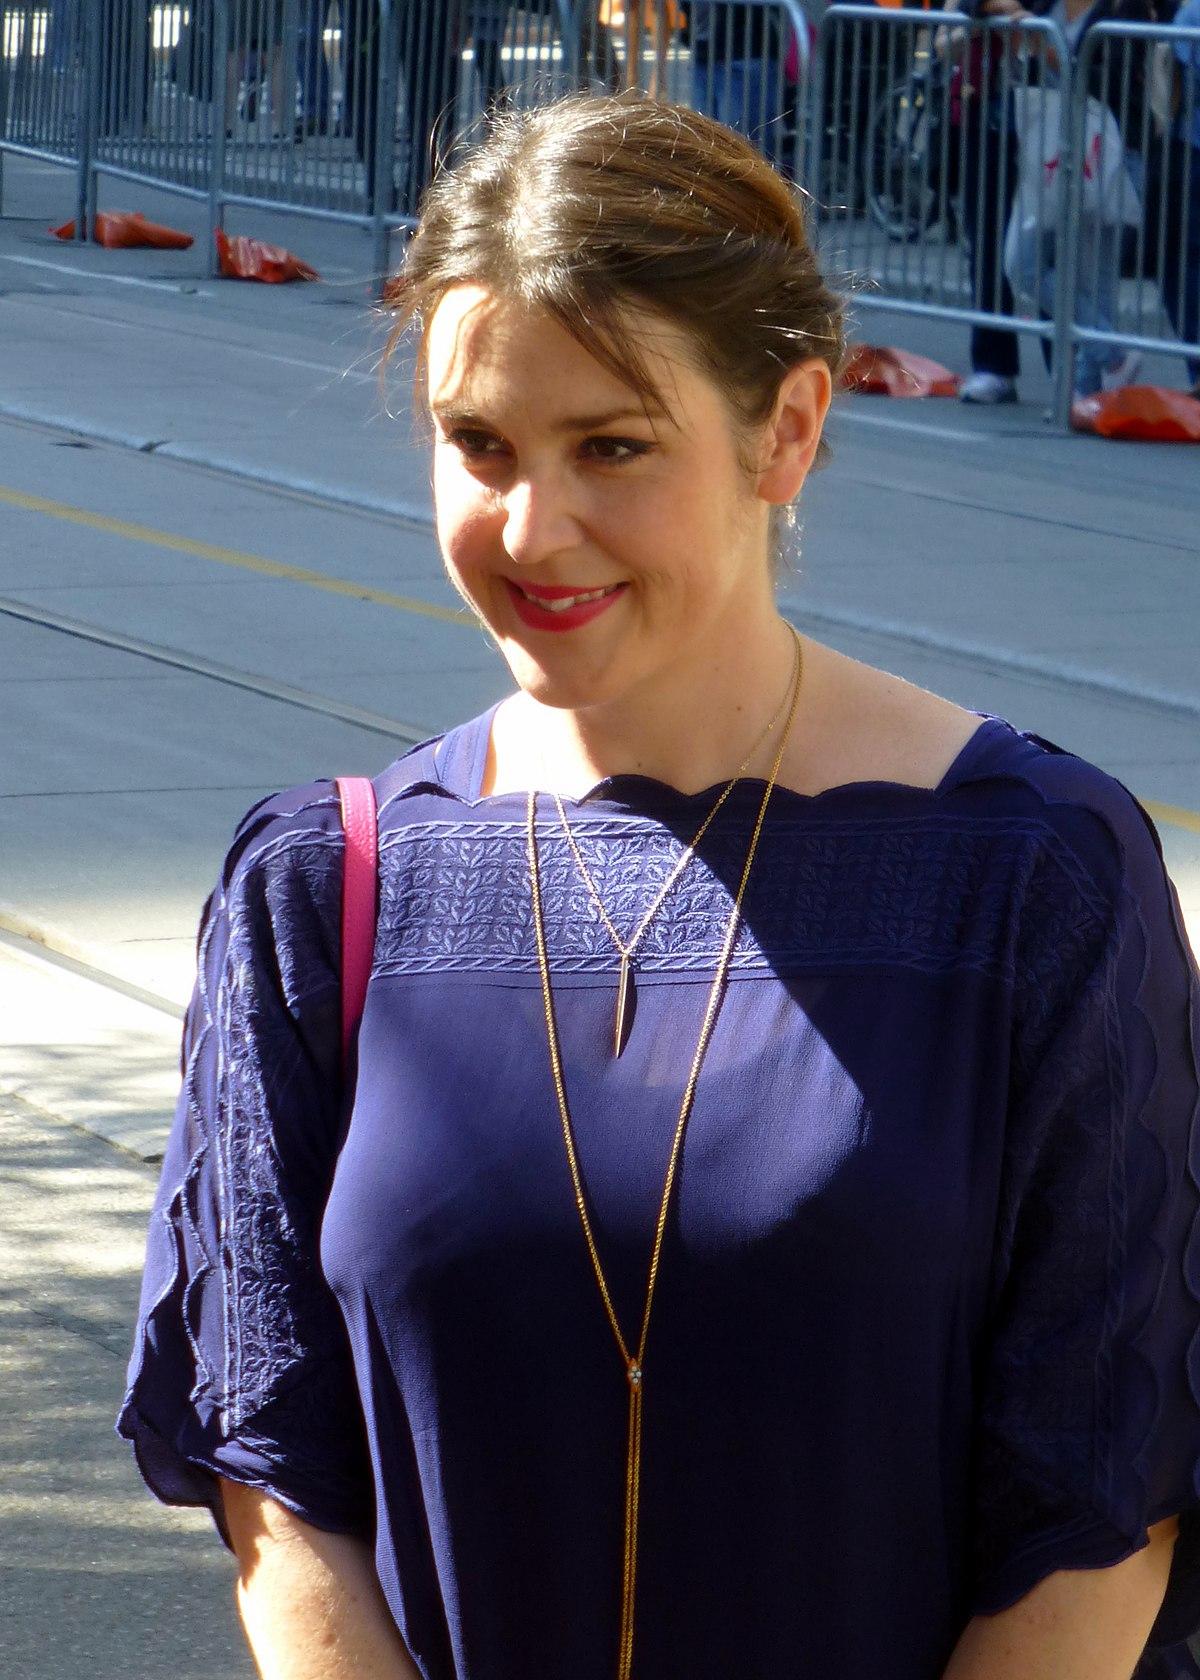 60+ Hot Pictures Of Melanie Lynskey Which Will Keep You Up At Nights 11